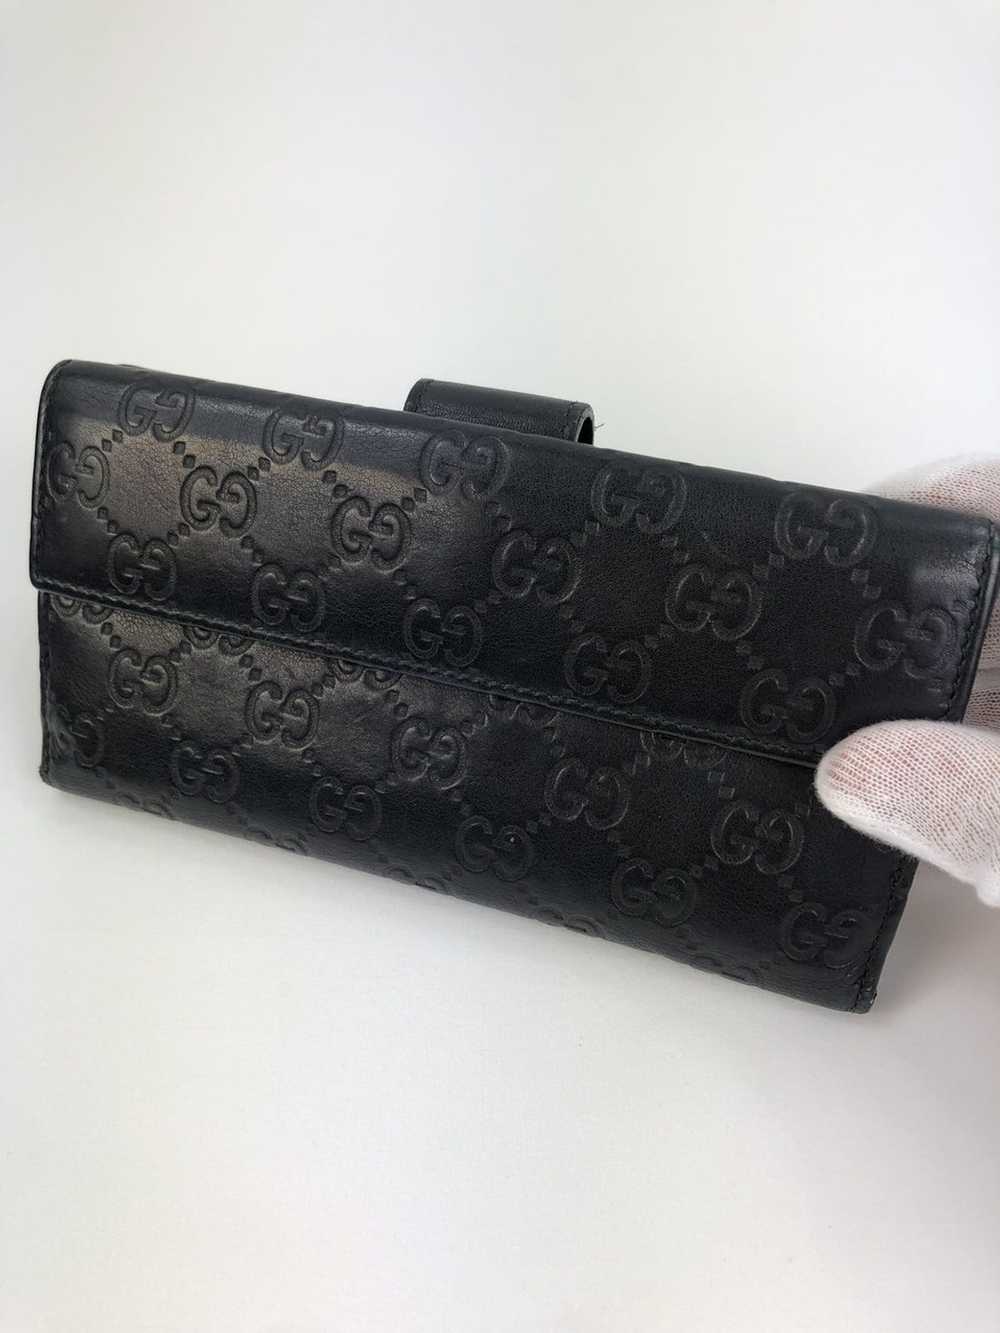 Gucci Gucci GG guccissima leather long wallet - image 2